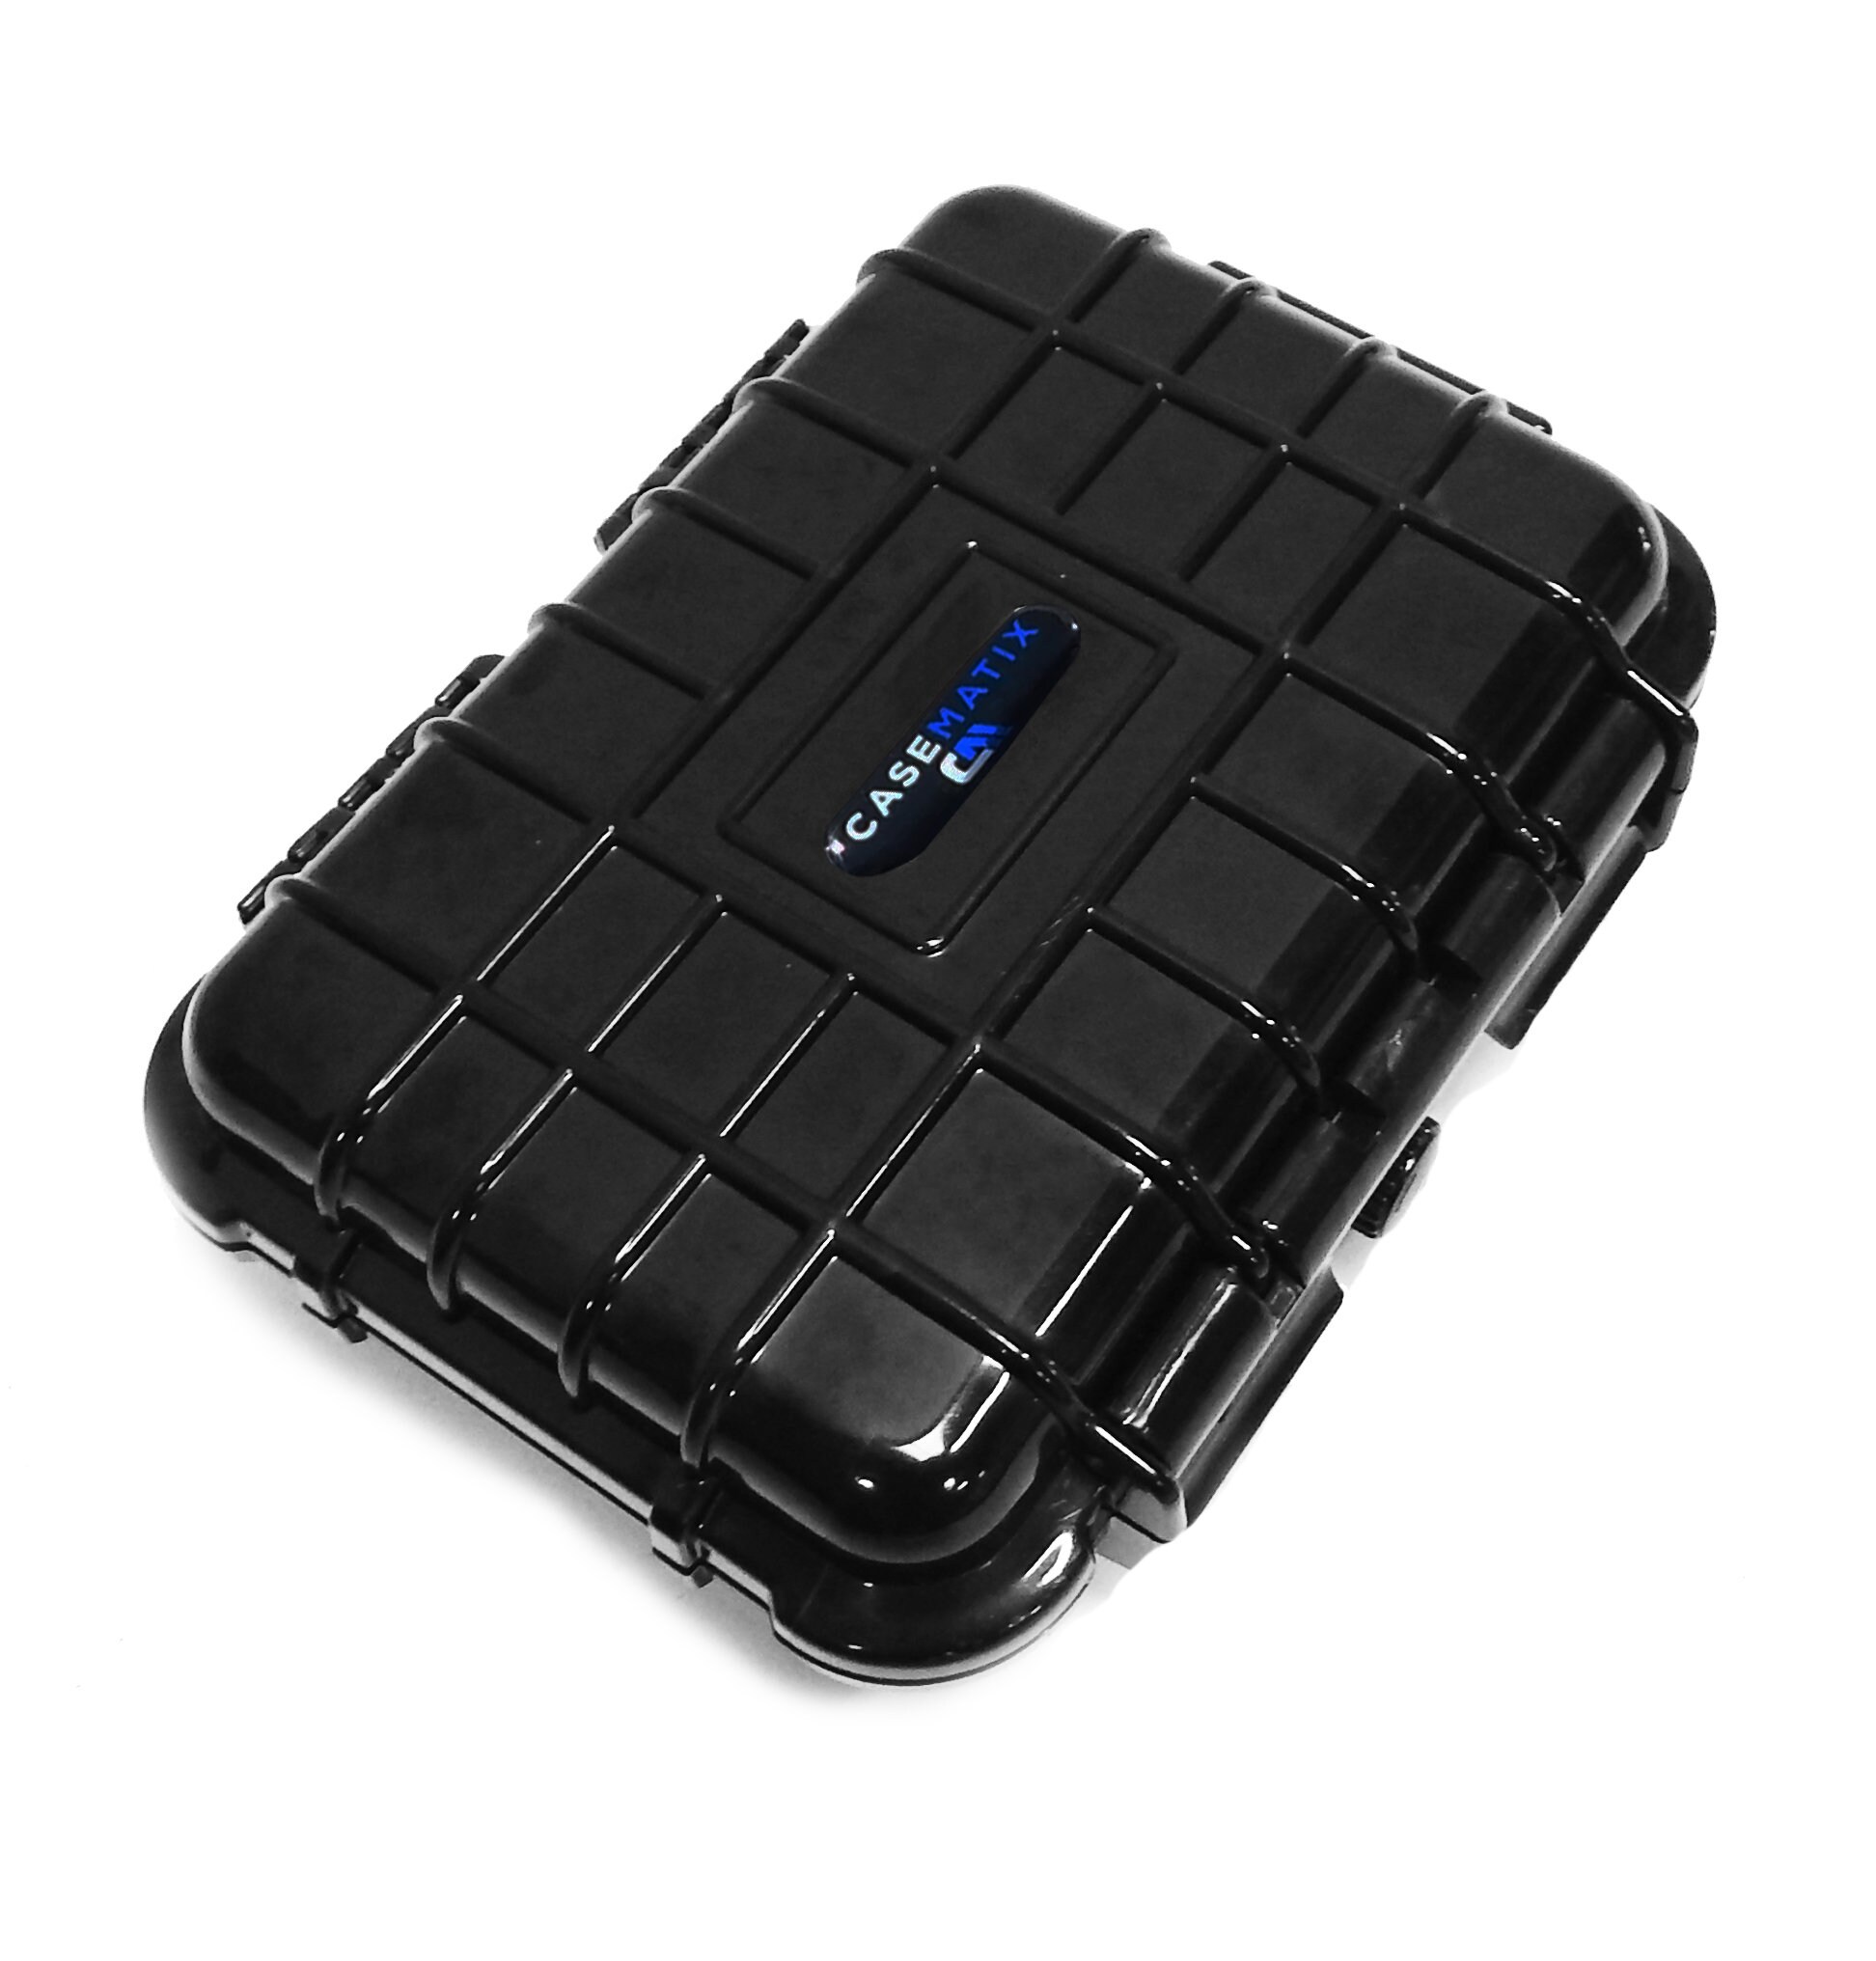 CASEMATIX Waterproof Gaming Adapter Case Fits the Xim APEX Console Input  Adapter, Xim Hub With 3 USB Ports and Cable Case Only 